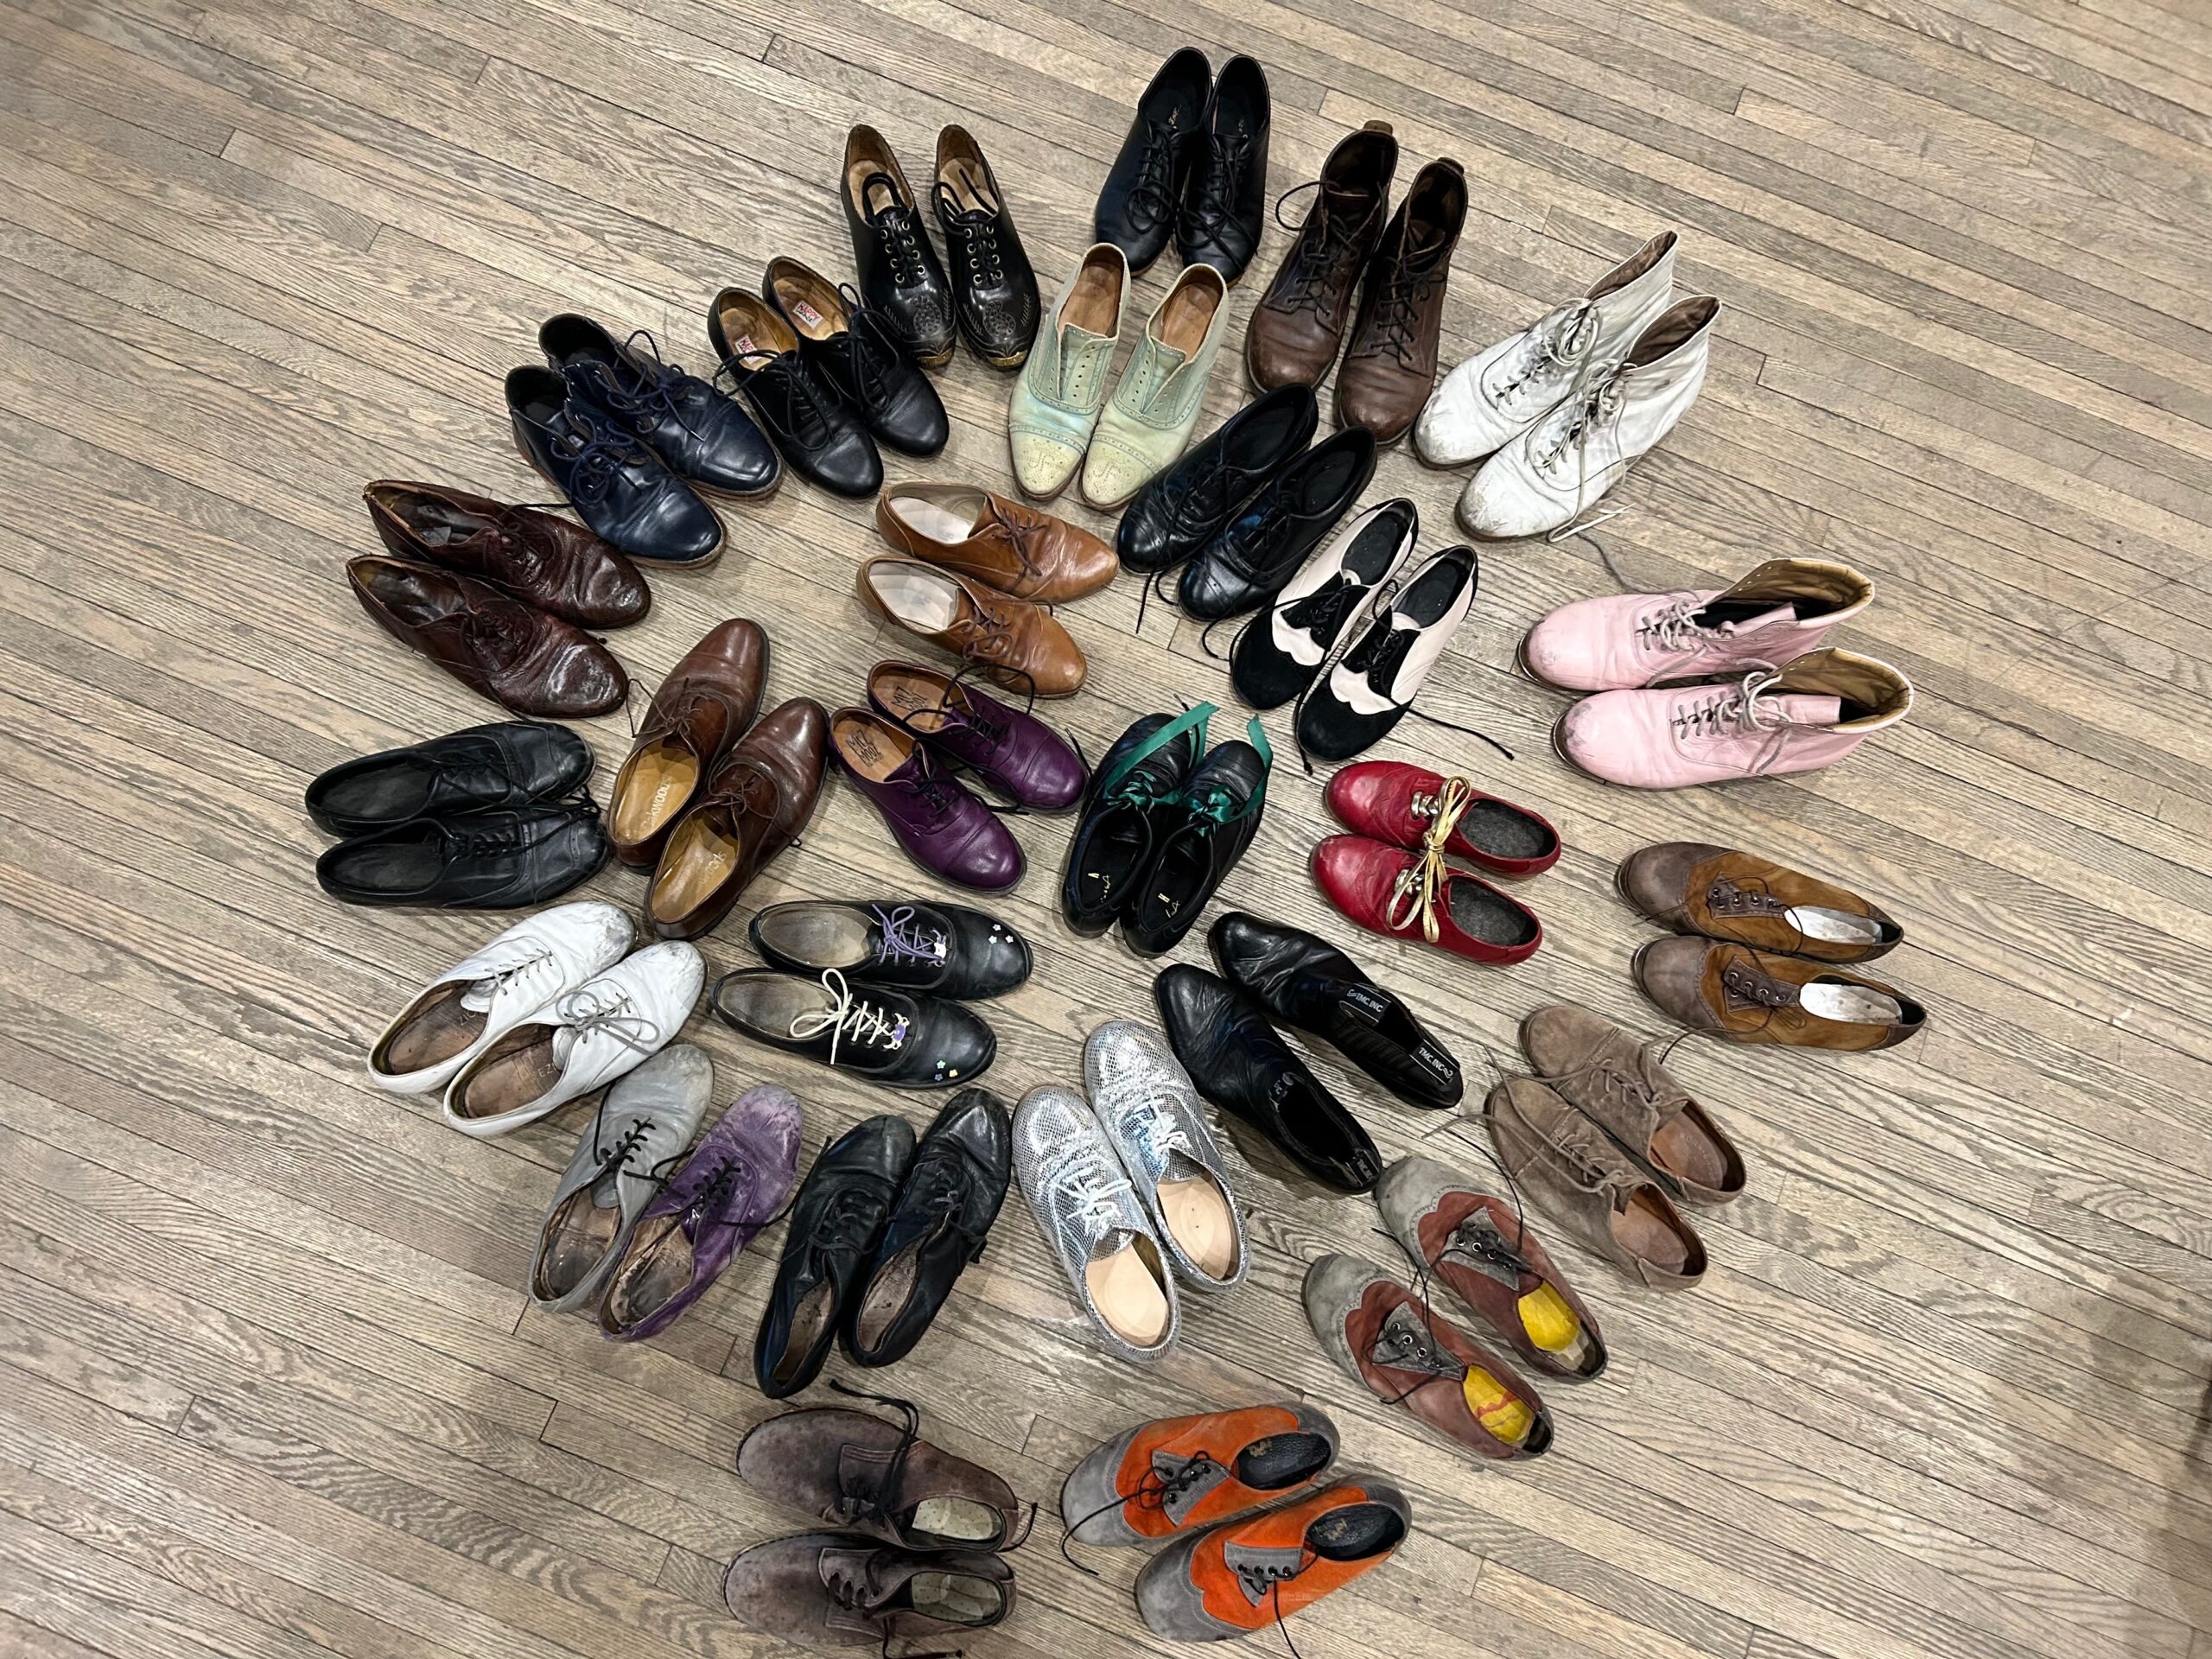 A group of hard-soled dance shoes in a variety of colors, all arranged in a rough circle on a wooden floor.